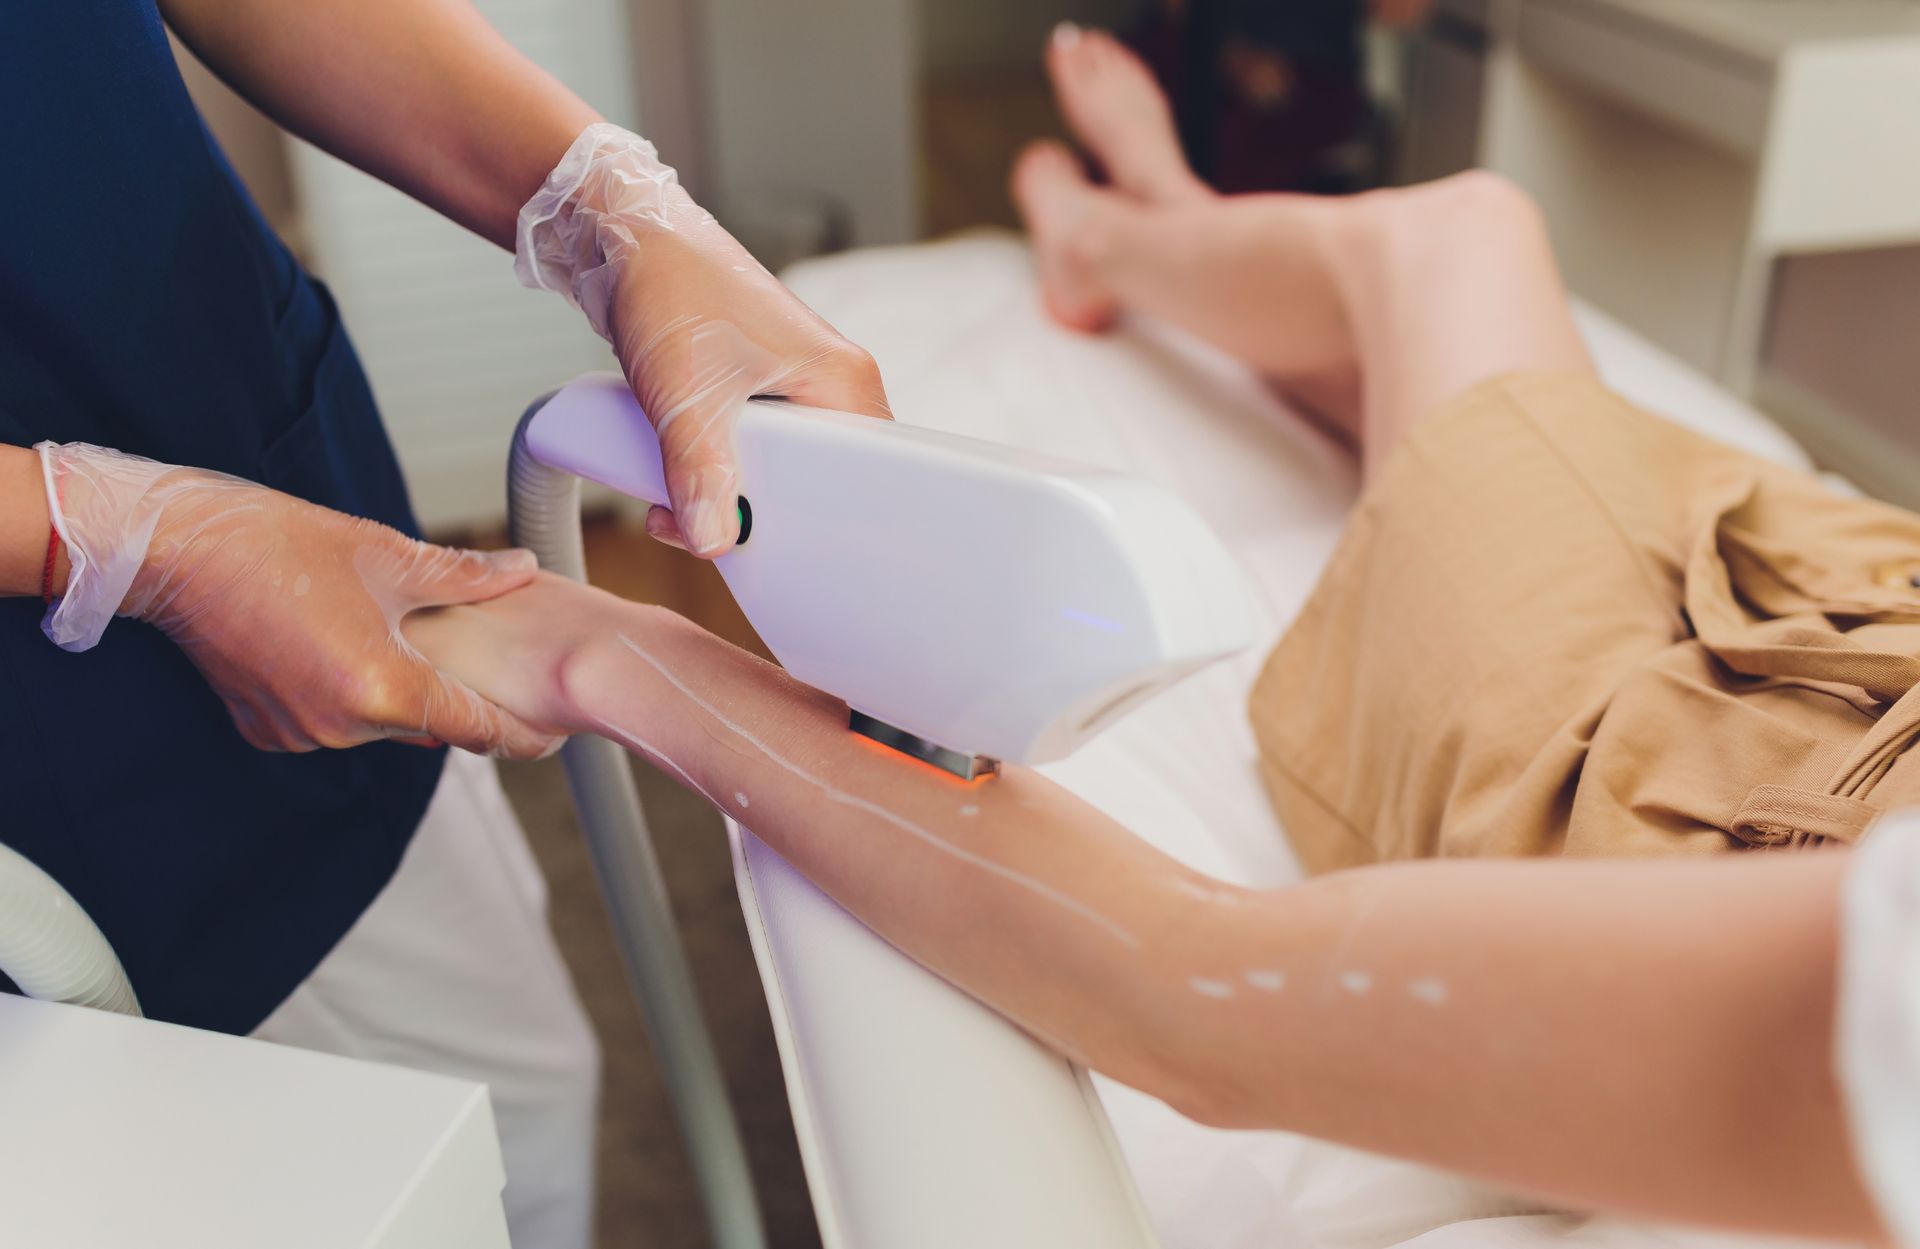 a woman is getting a laser hair removal treatment on her arm .